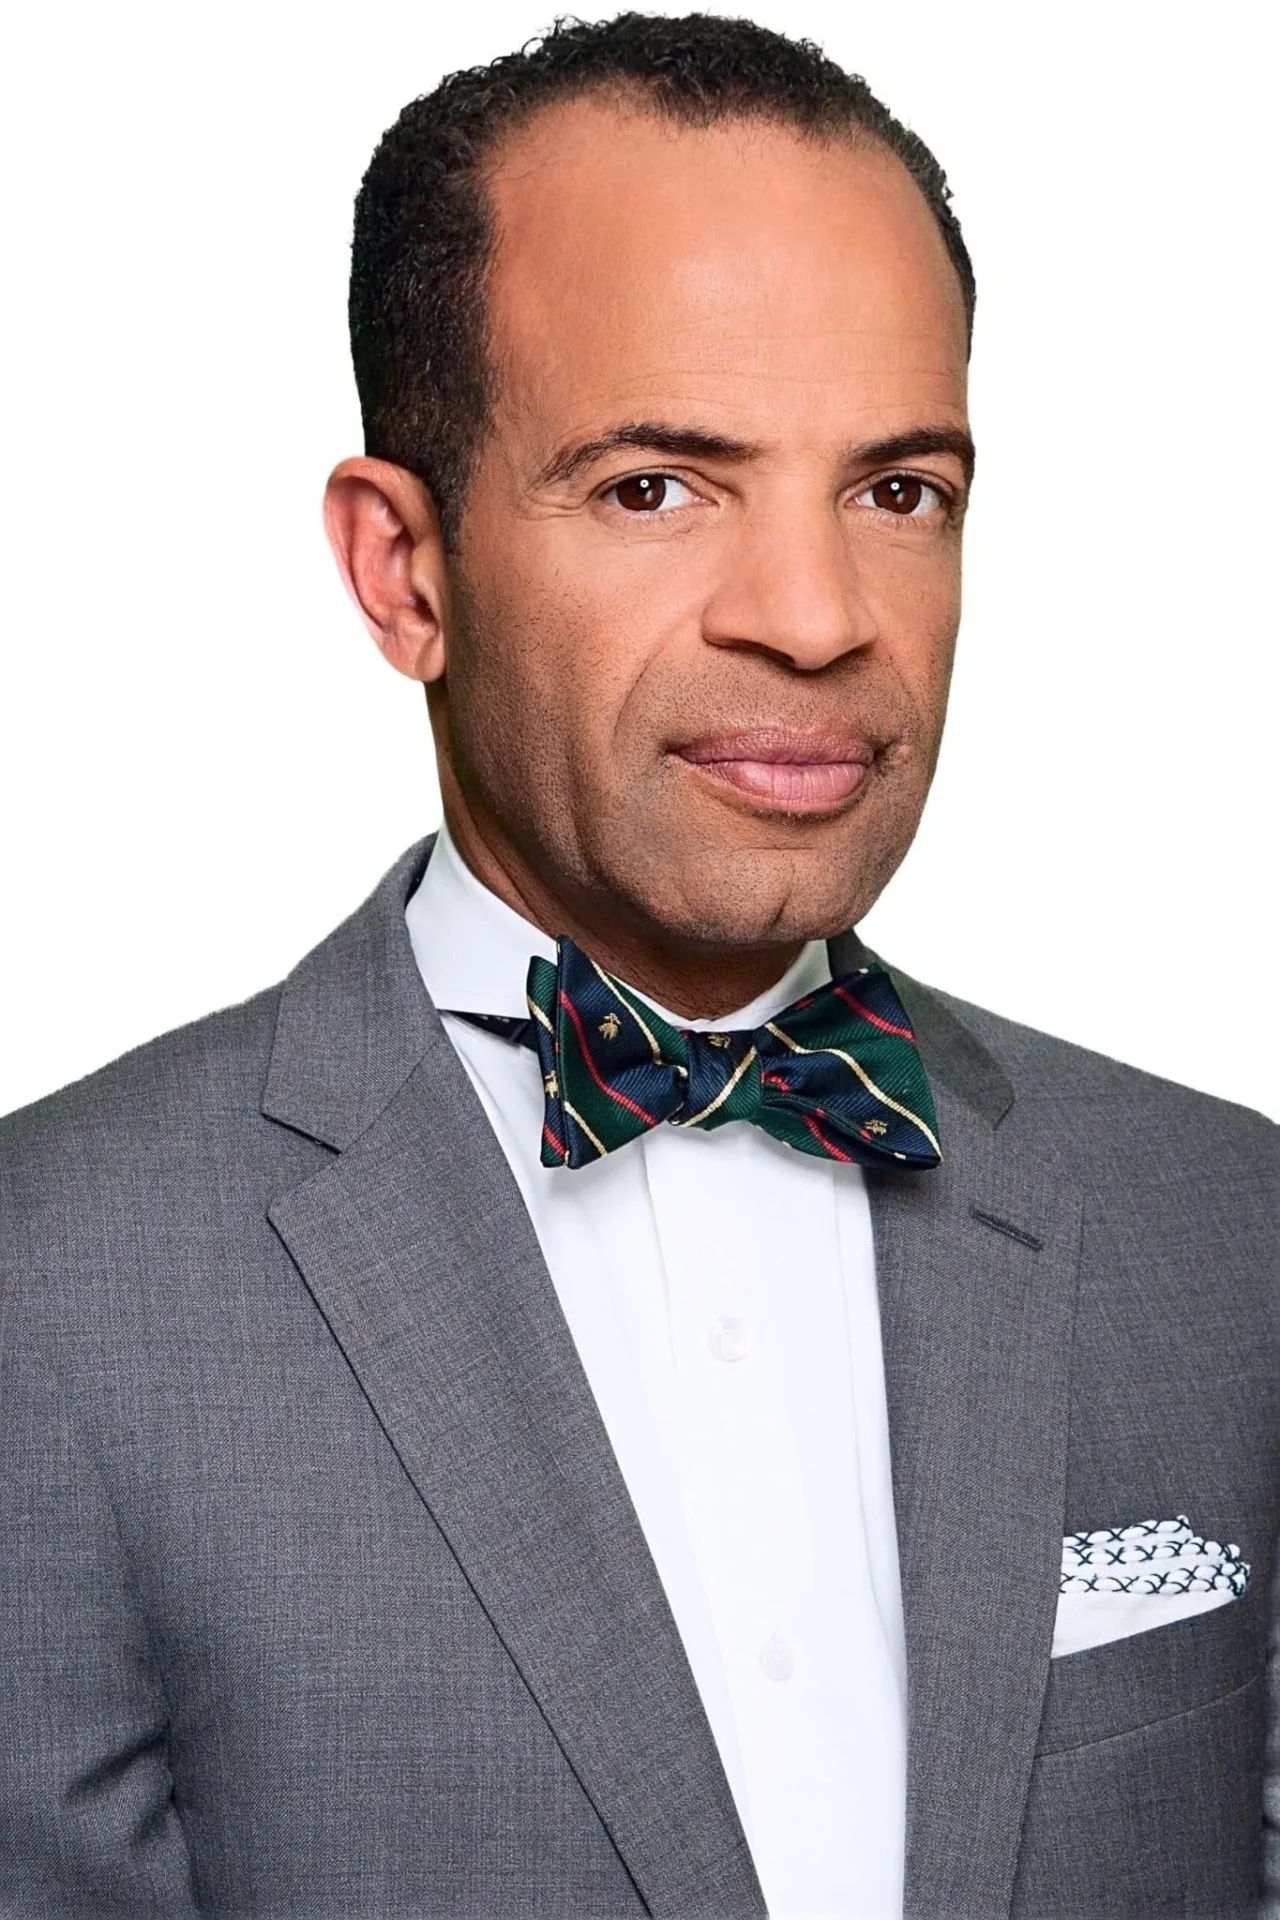 A man in a suit and bow tie.